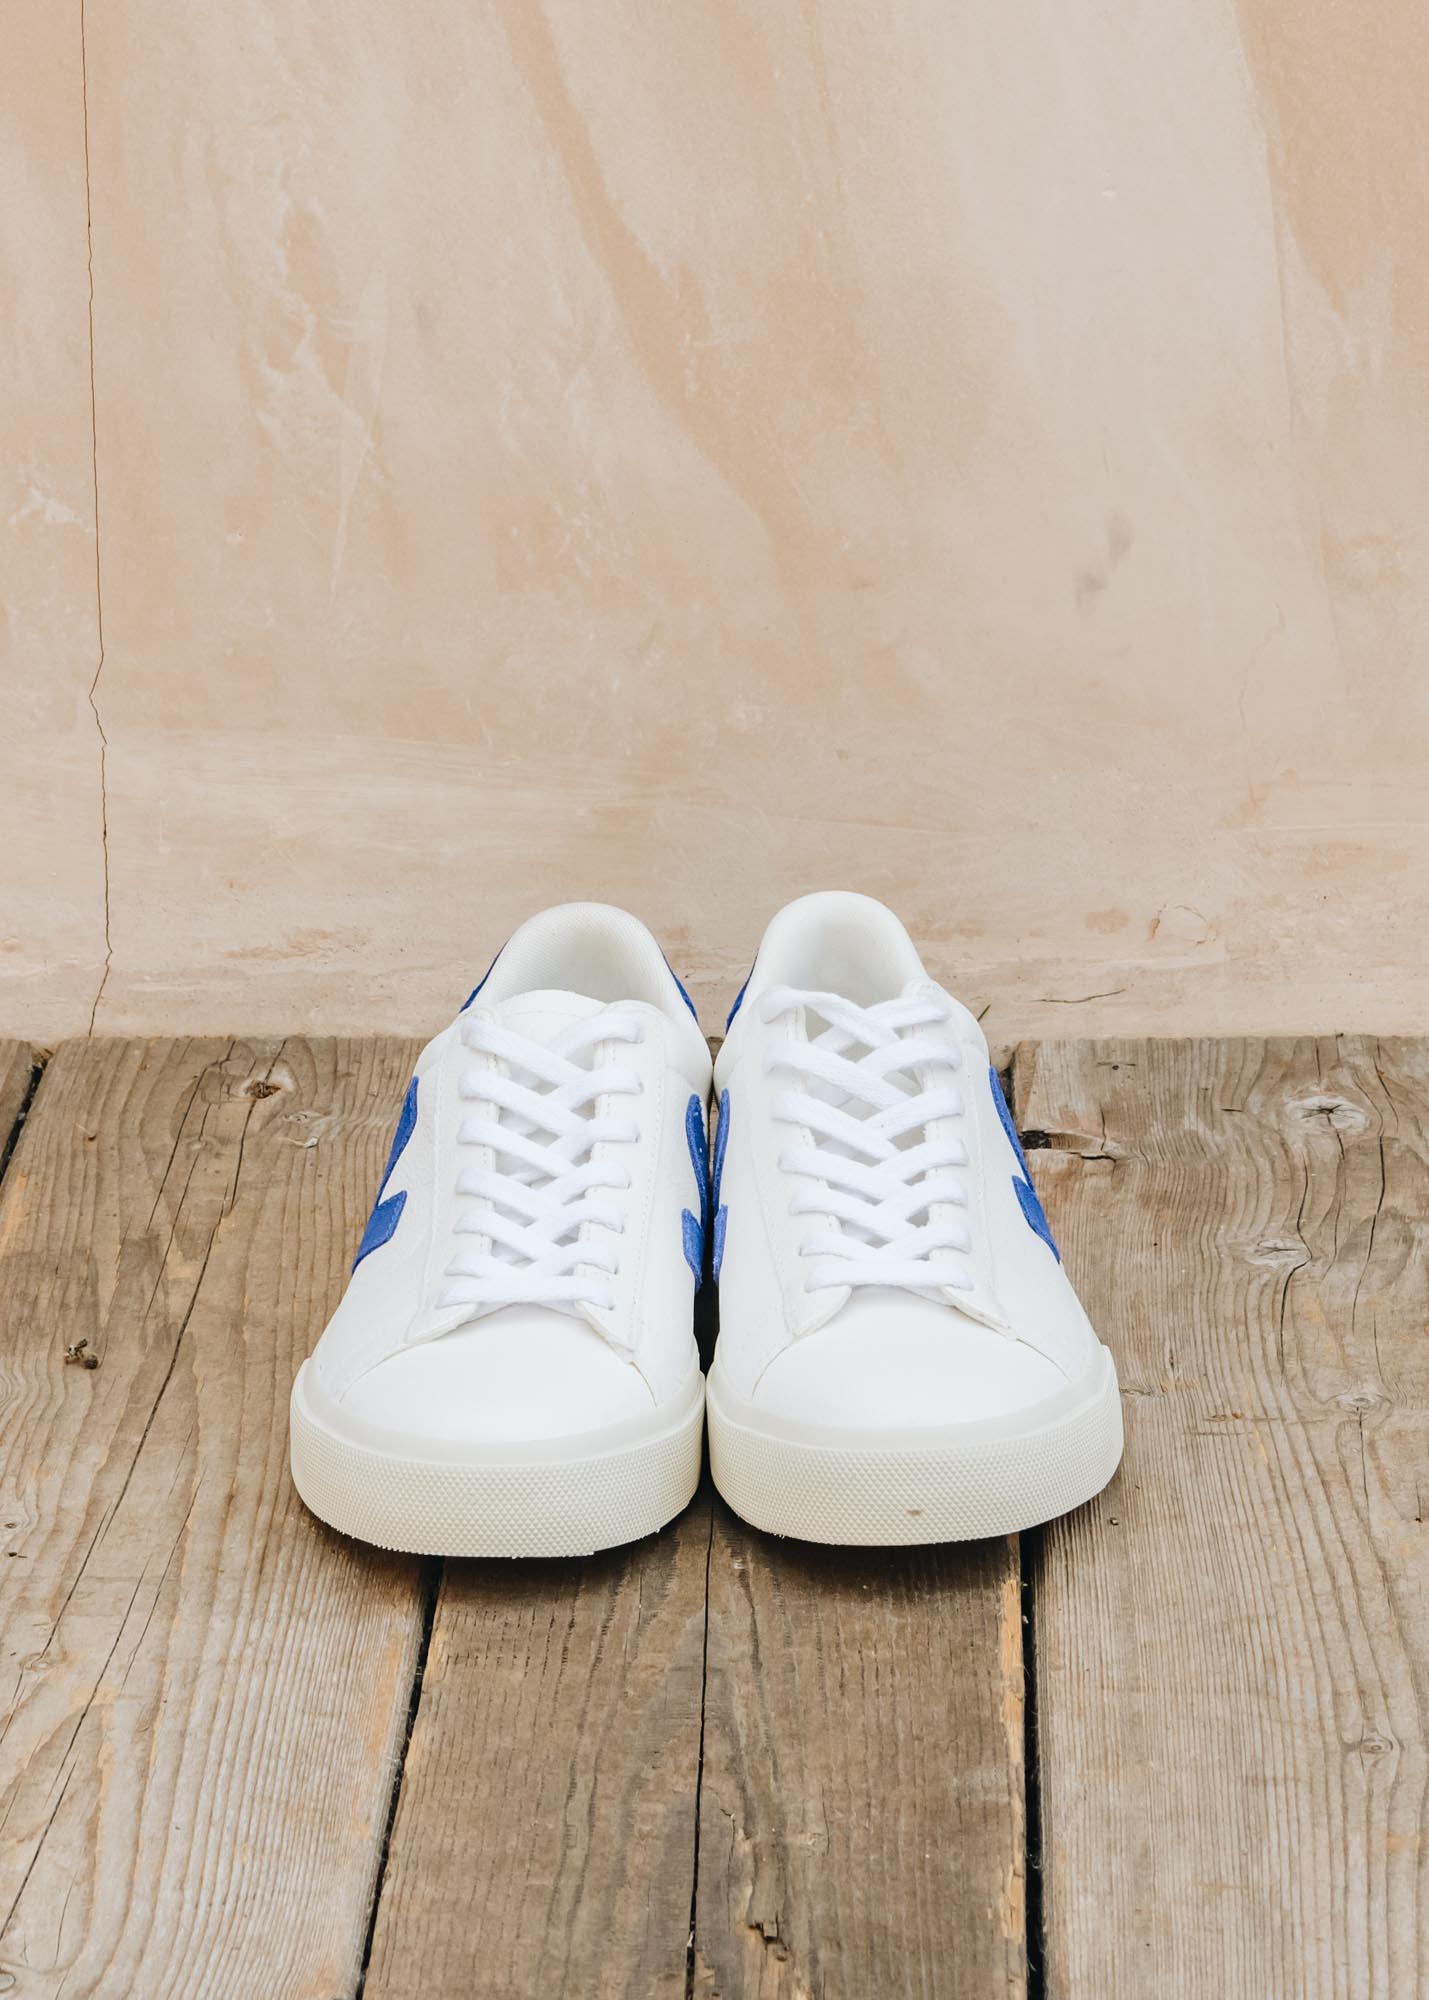 Veja Women's Campo Leather Trainers in Extra White and Paros